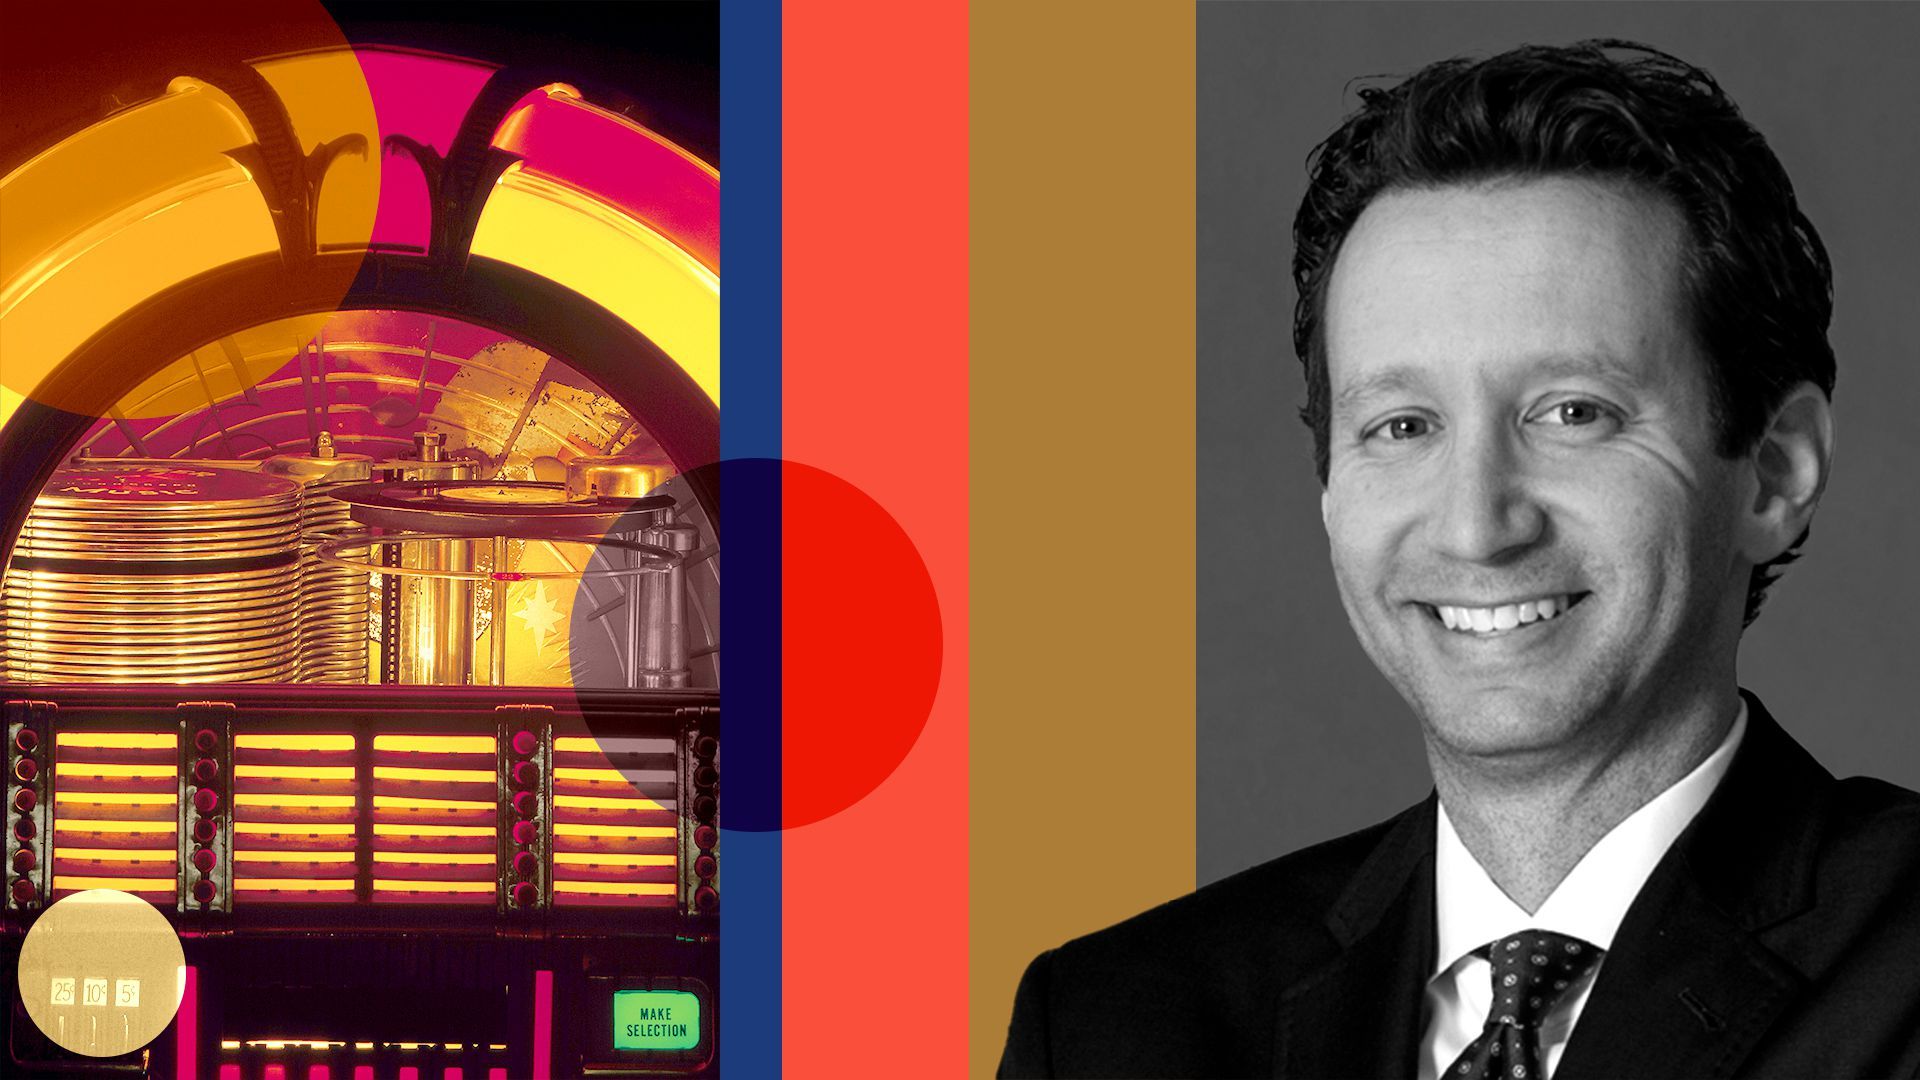 Photo illustration of Mark Boidman with an image of a jukebox and abstract shapes.